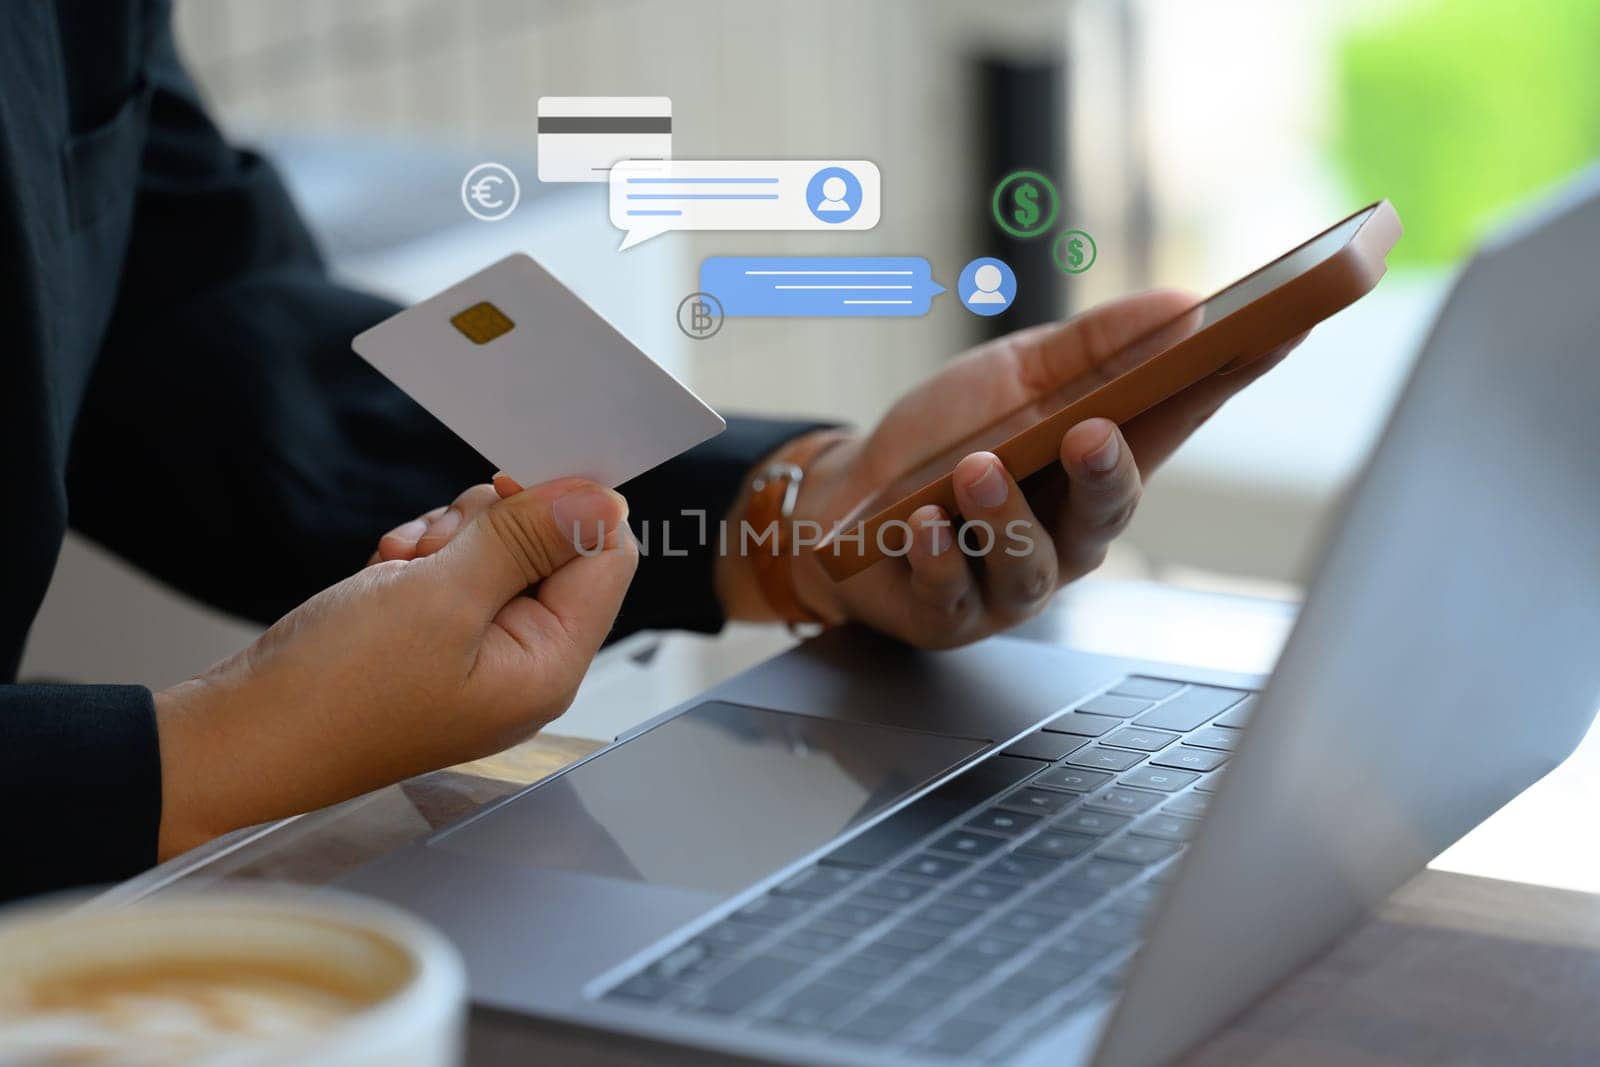 Businessman holding credit card making payment digital transaction paying online on smartphone.